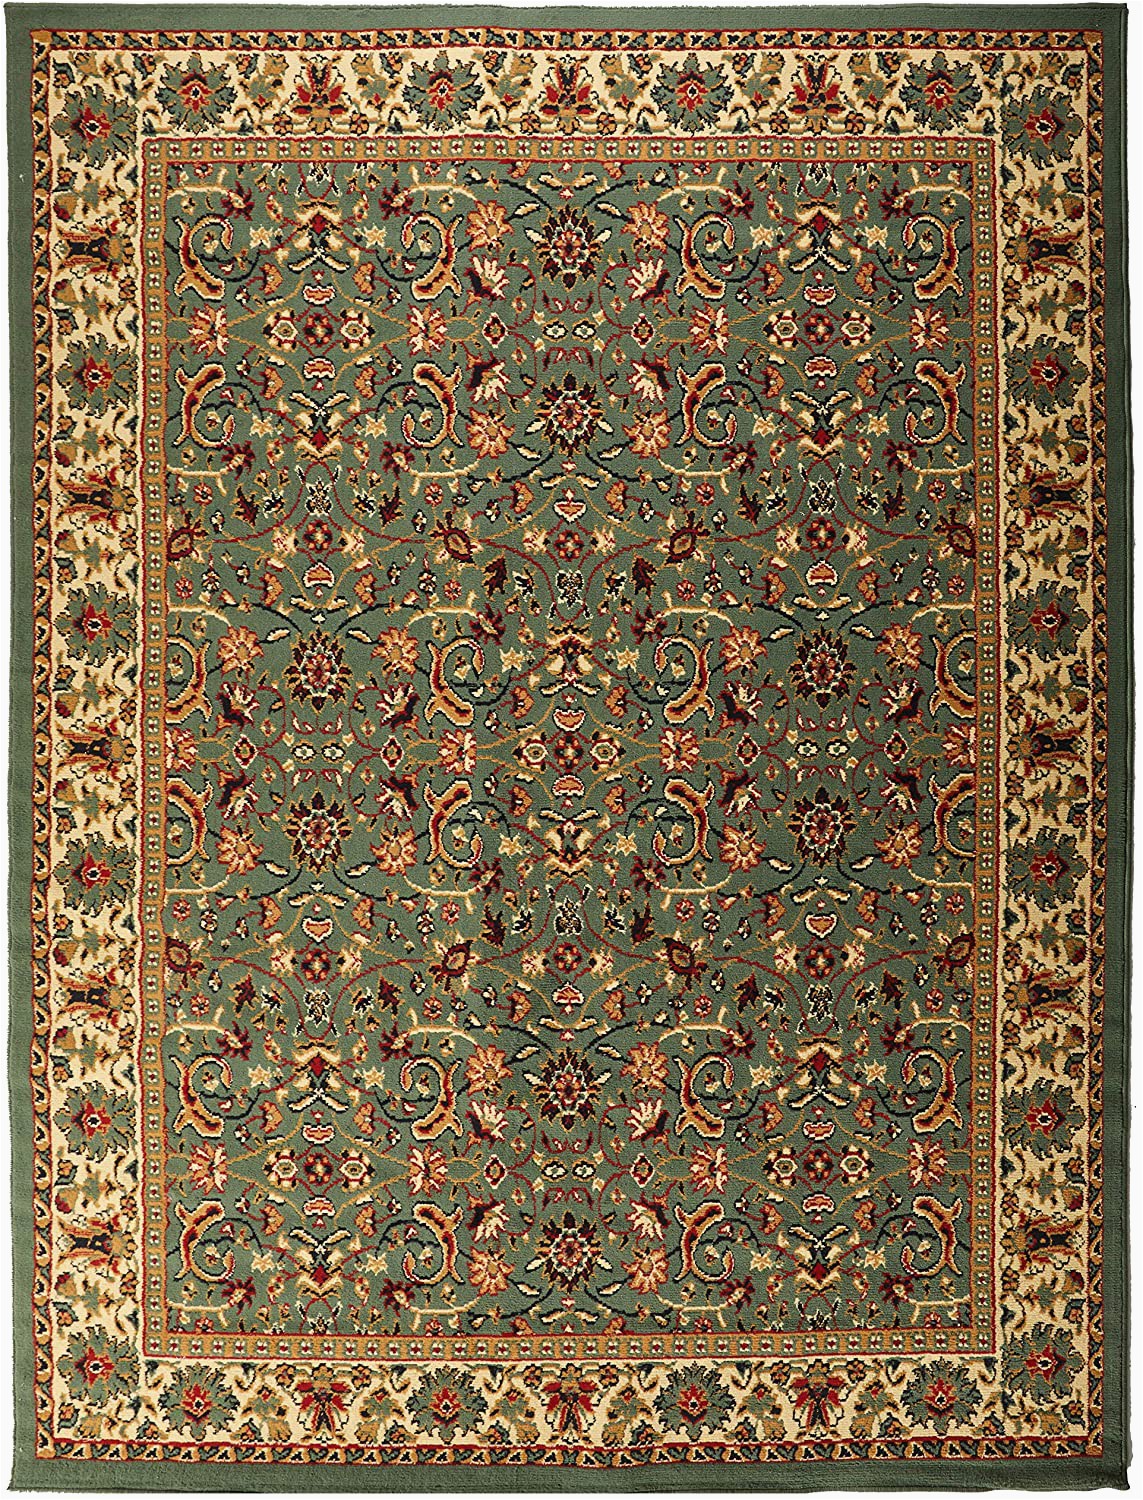 Large area Rugs Under 100 Traditional area Rug Medallion Green Rugs for Living Room 8×10 Under 100